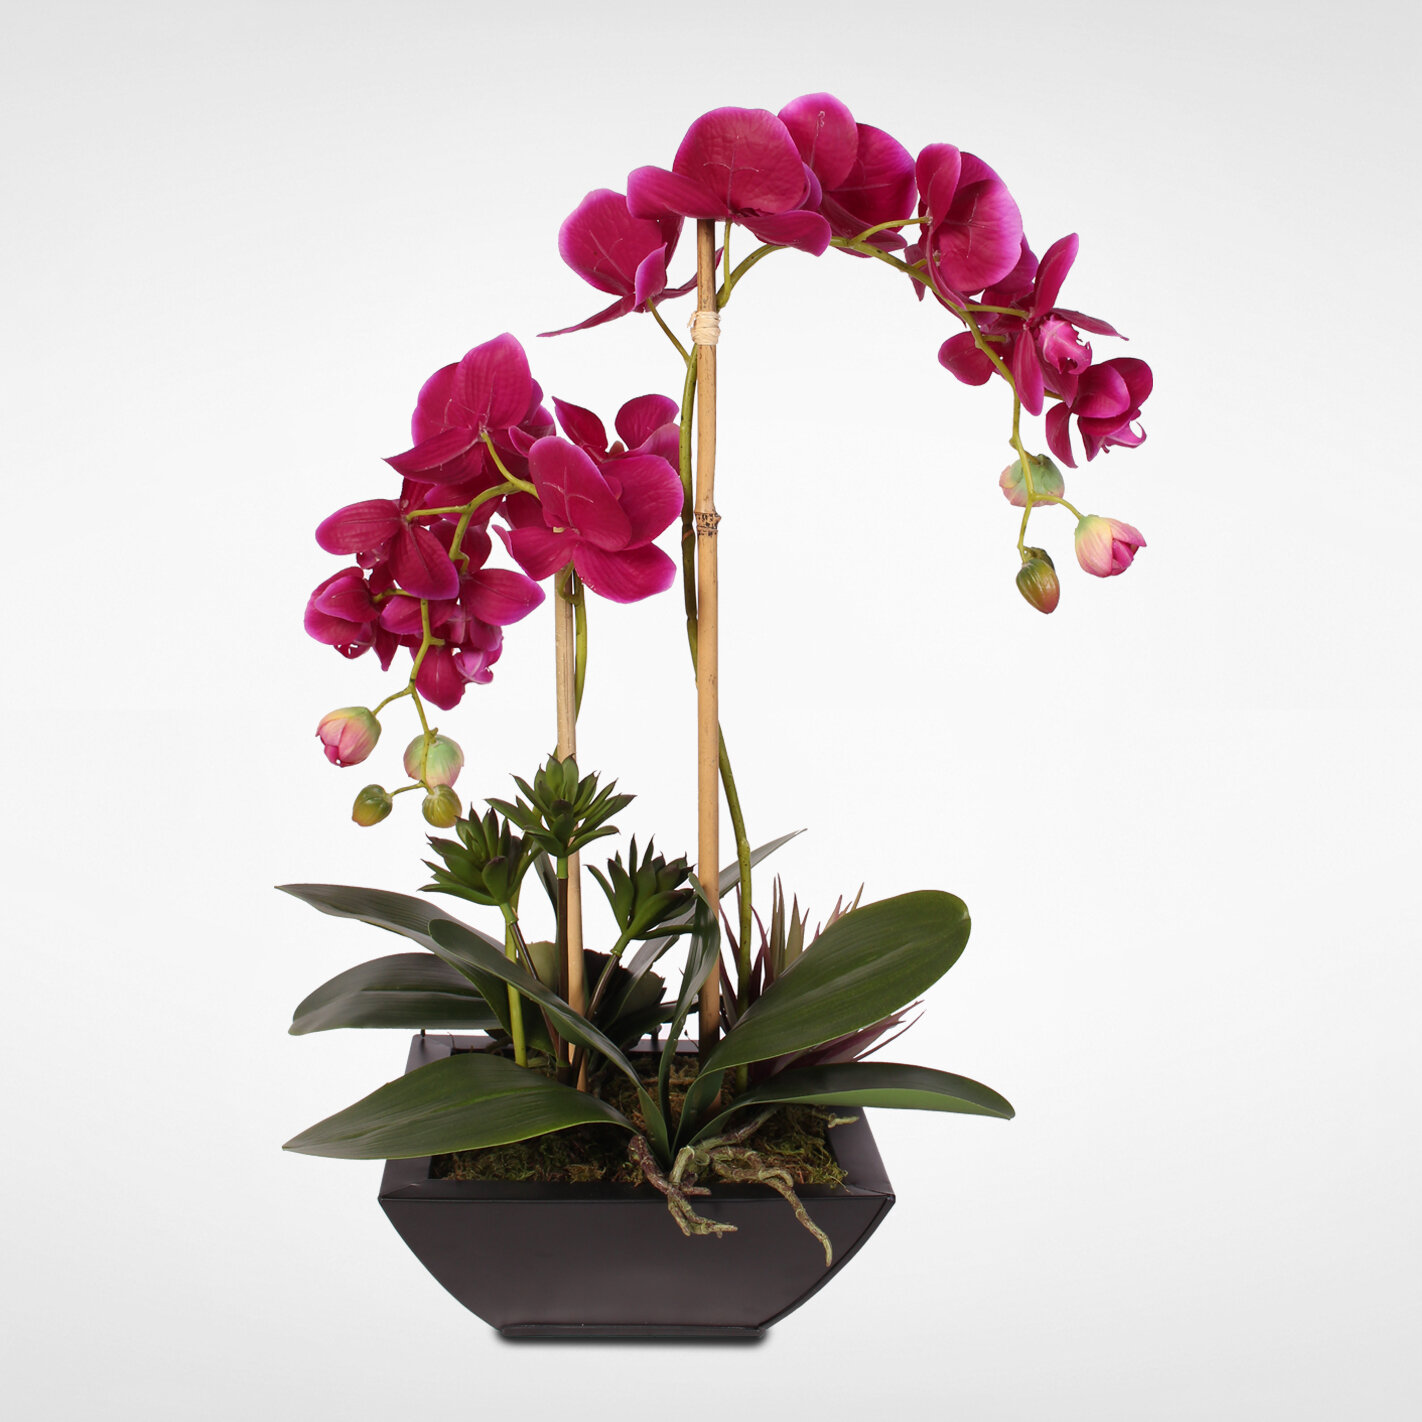 Handmade Phalaenopsis Orchid and Artificial Succulents Floral Arrangement in Pot 